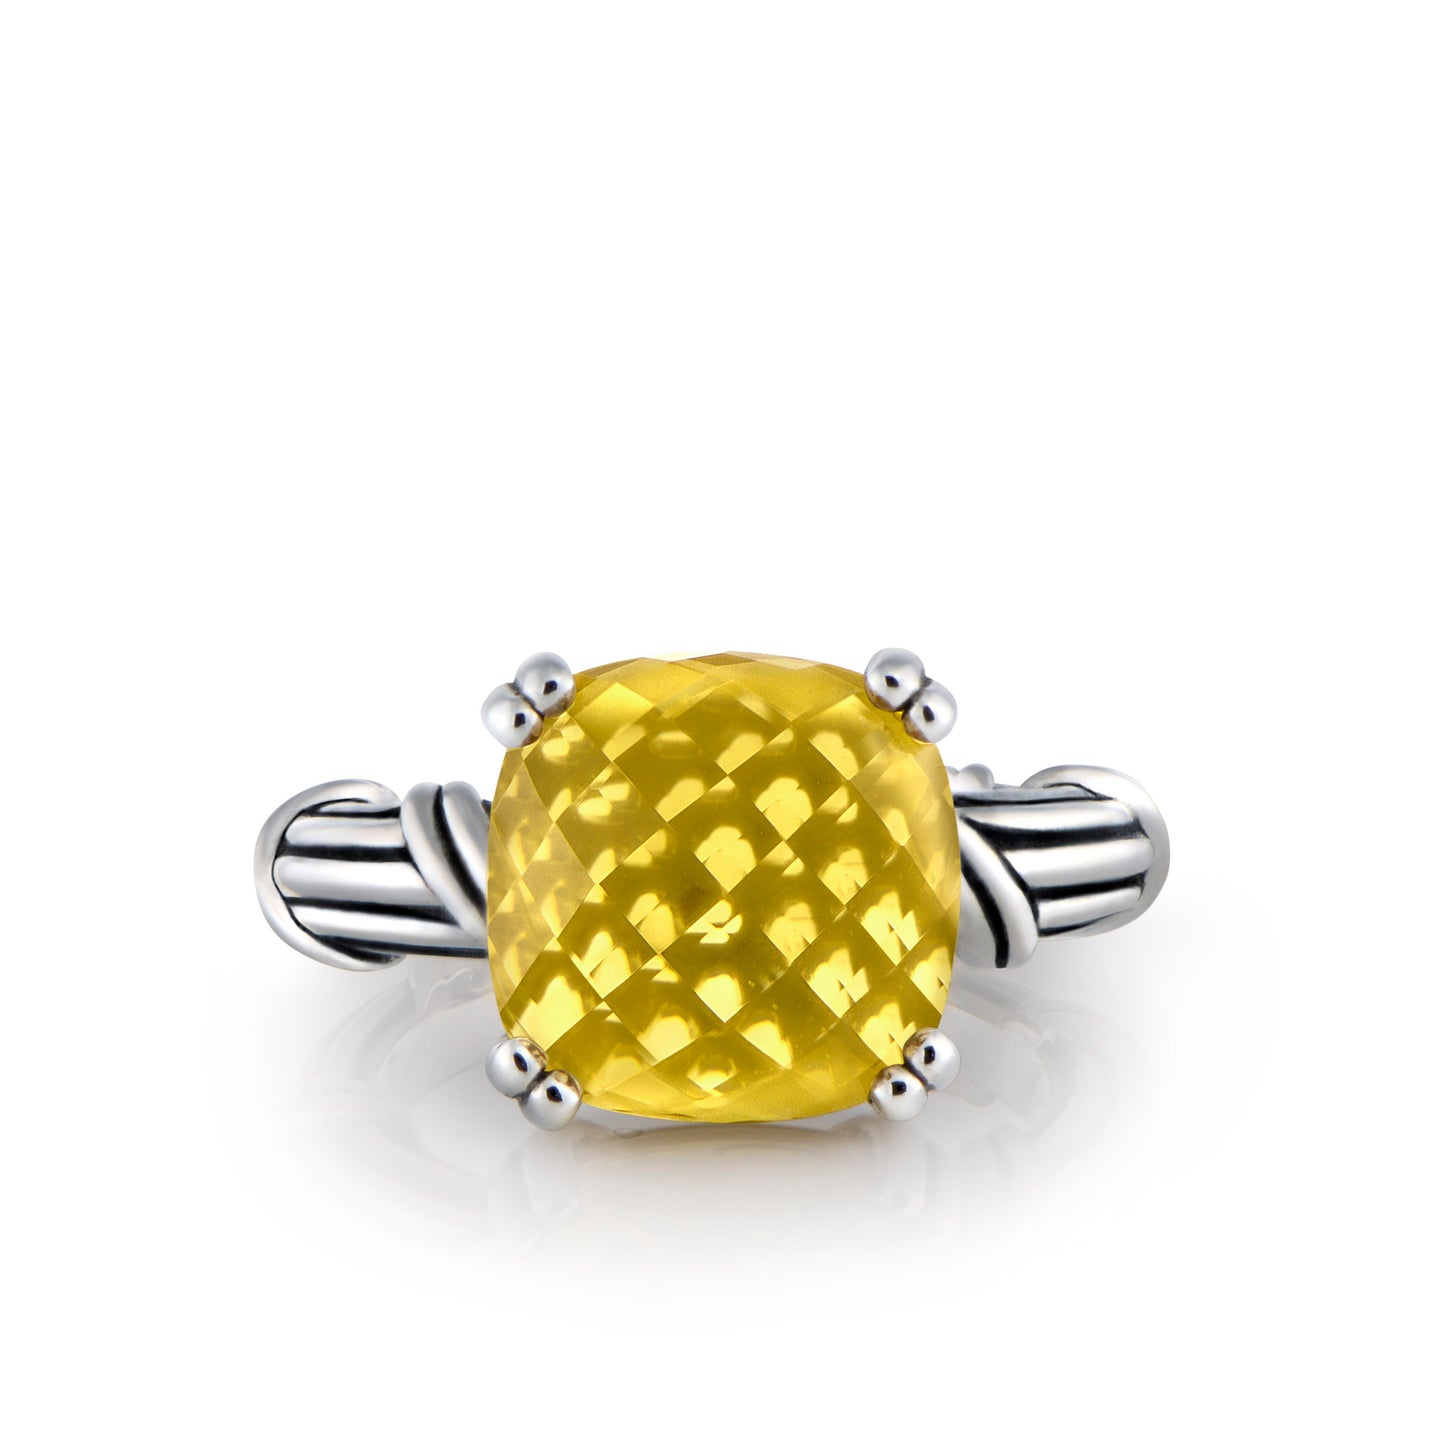 Fantasies Citrine Cocktail Ring in sterling silver